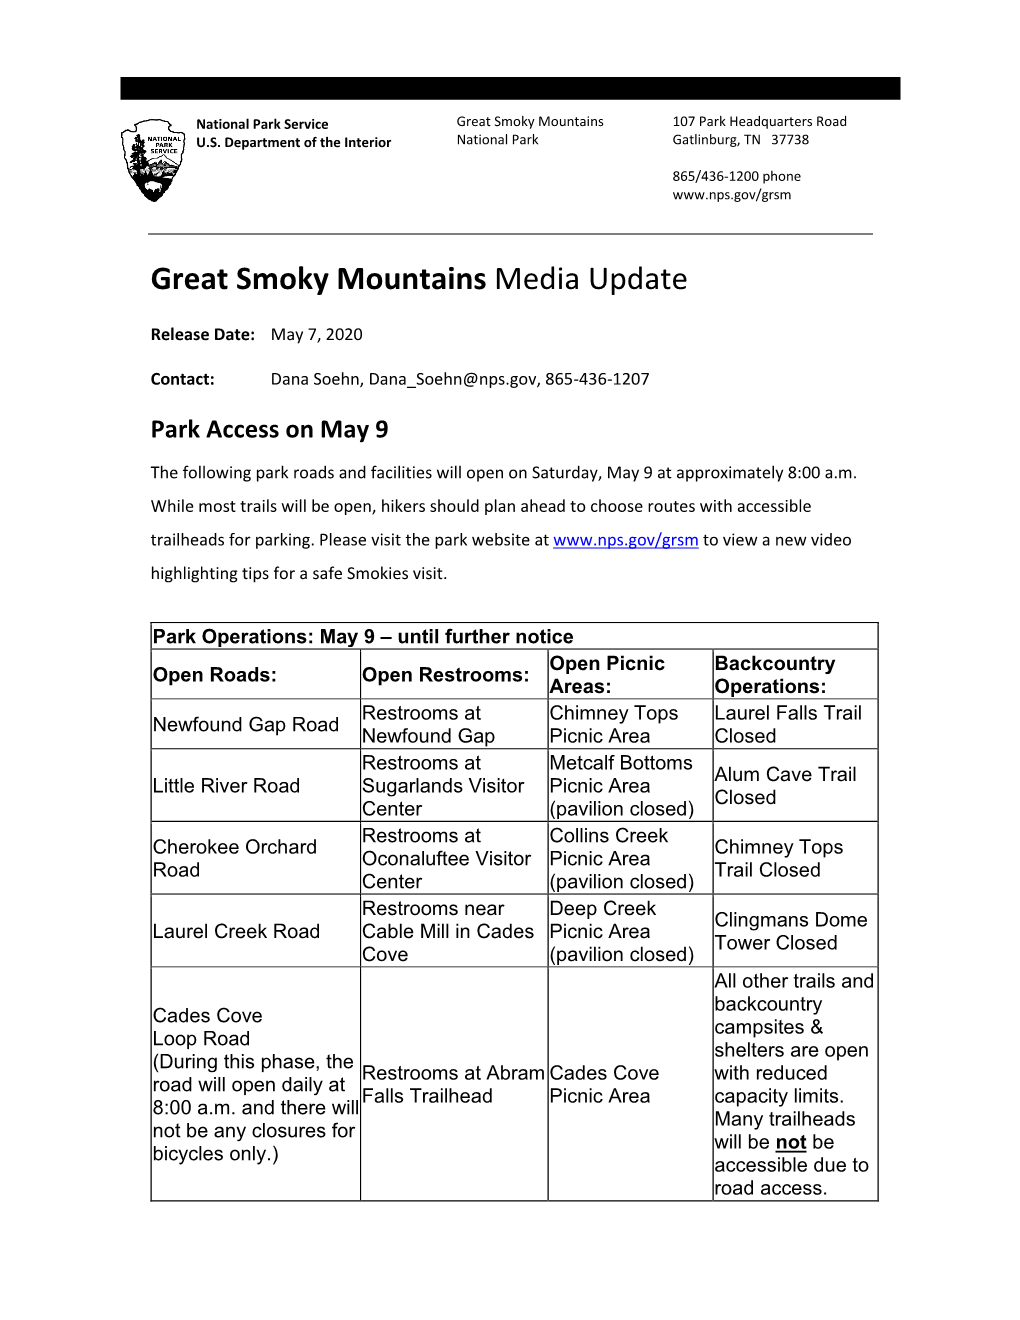 Great Smoky Mountains Media Update